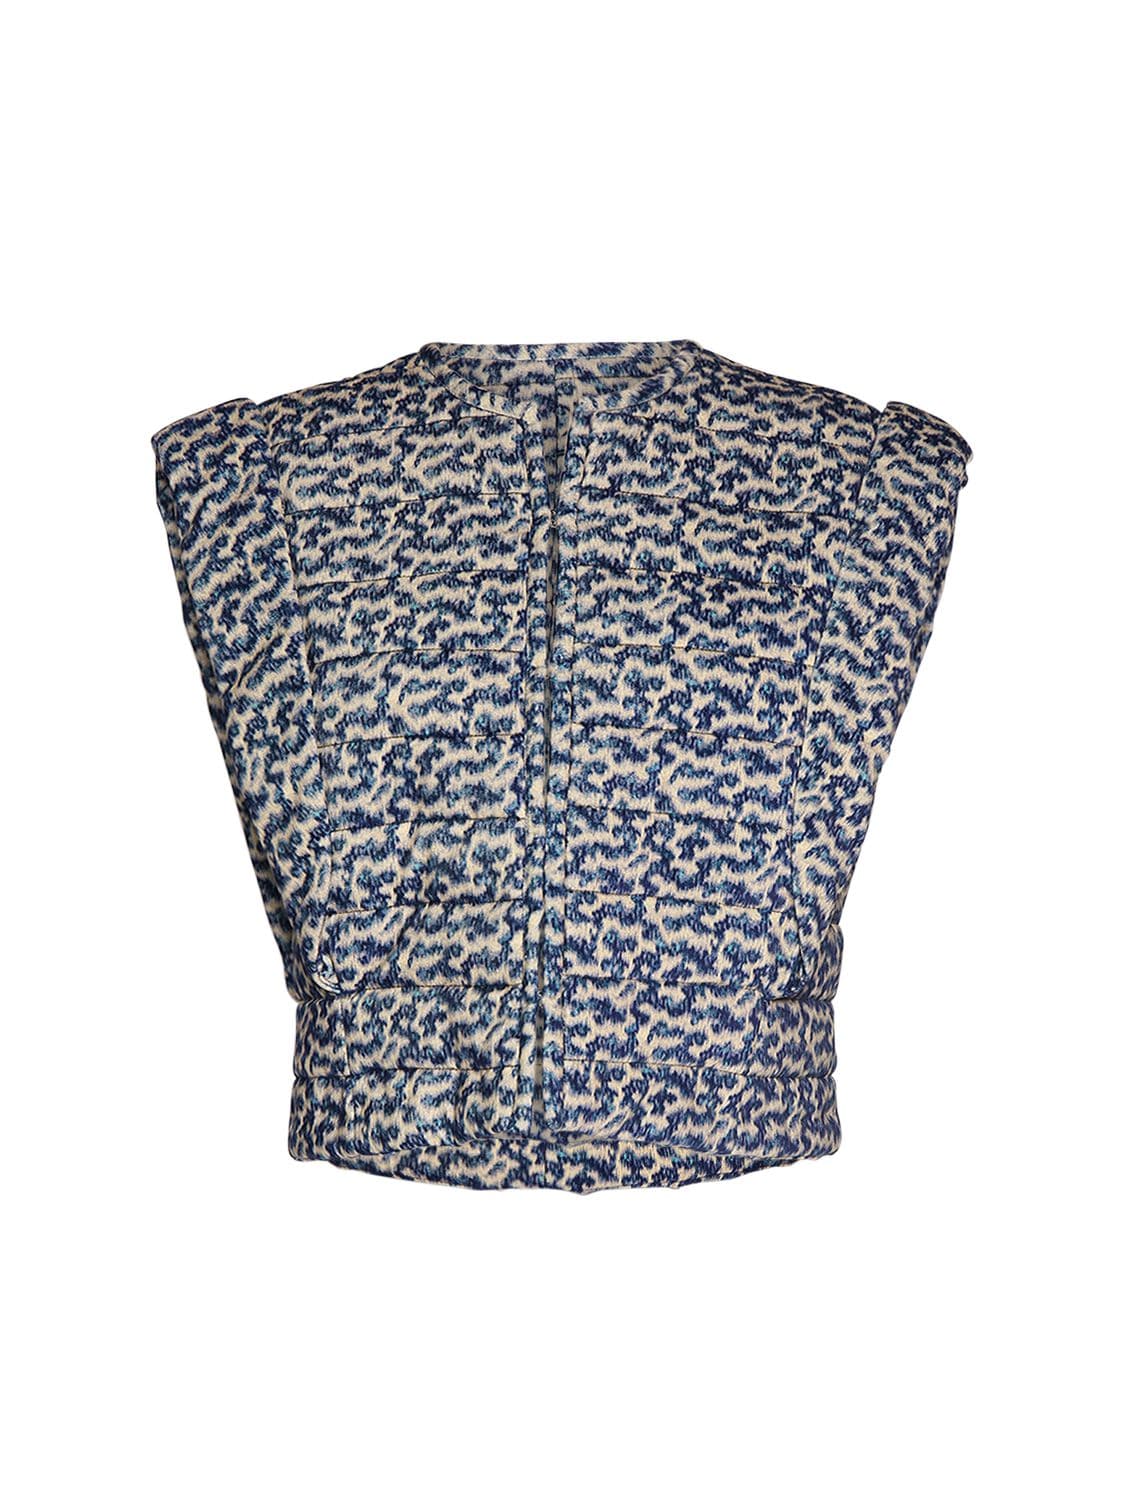 Image of Aziela Padded Printed Cotton Vest